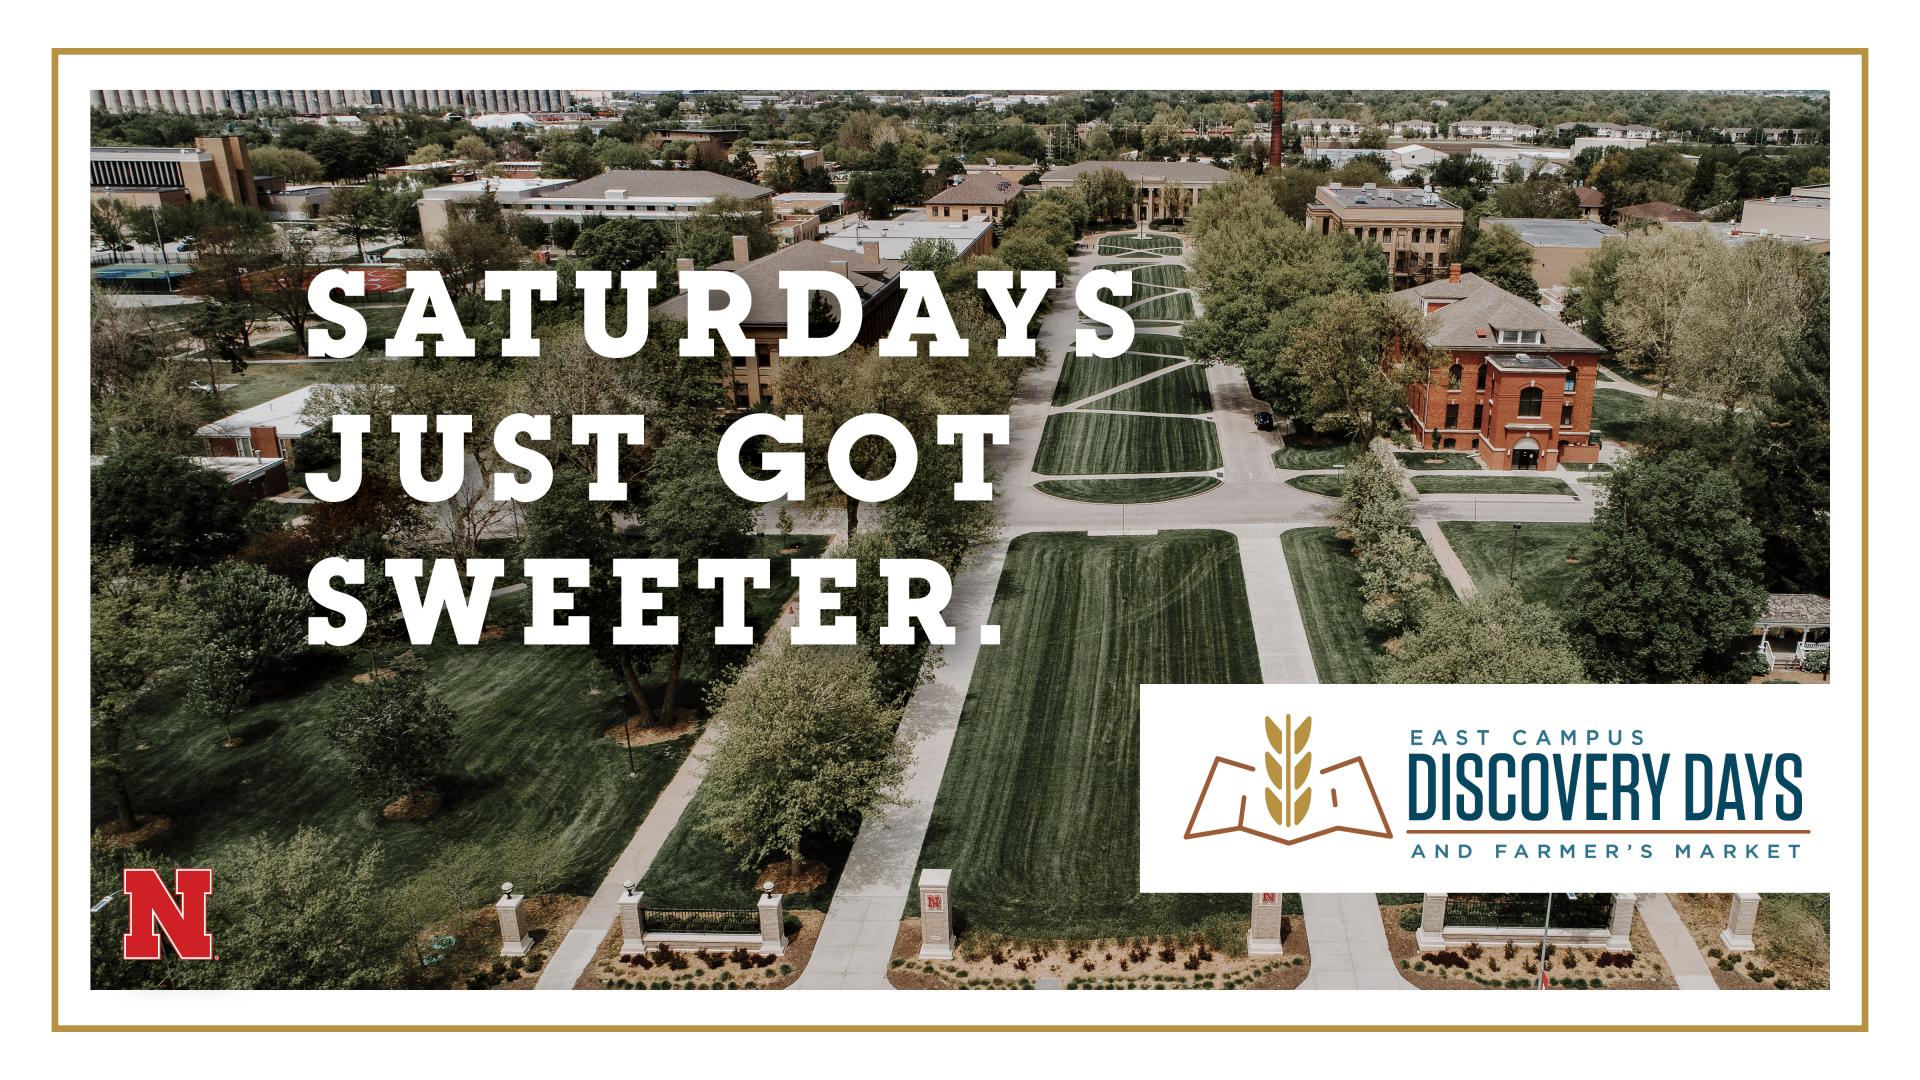 East Campus Discovery Days and Farmers Market Photo